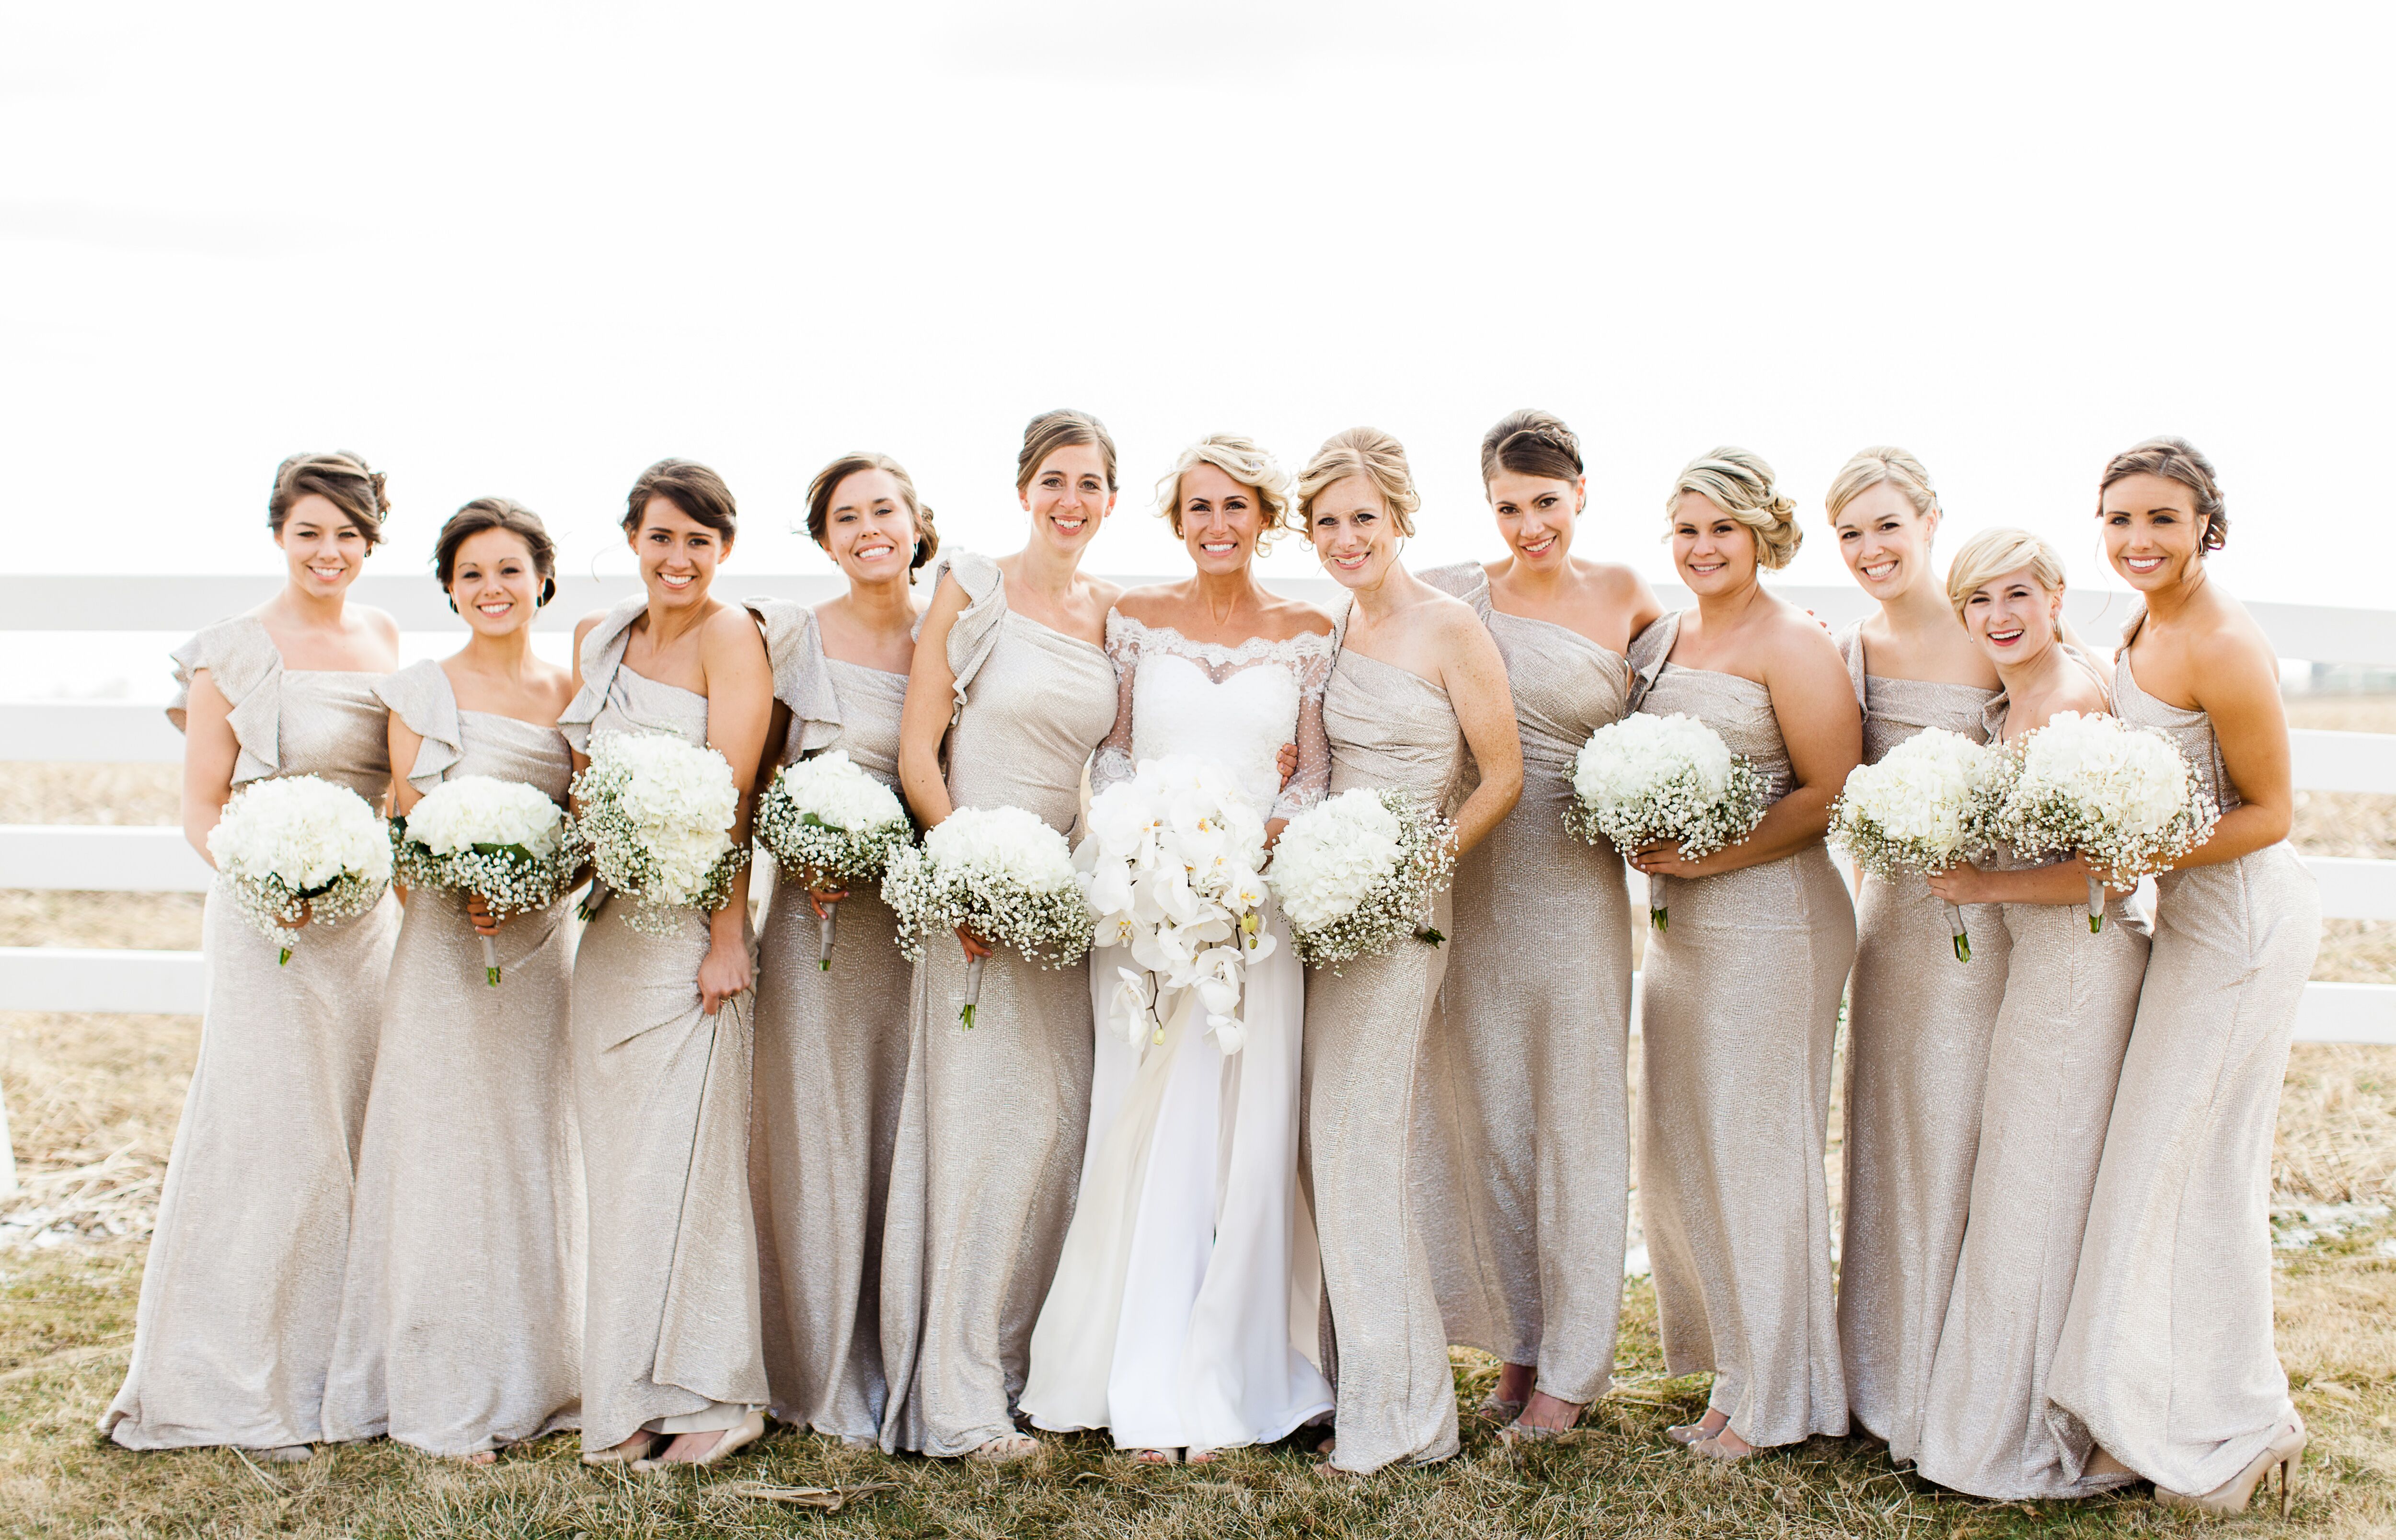 One-Shoulder Champagne-Colored Bridesmaid Dresses